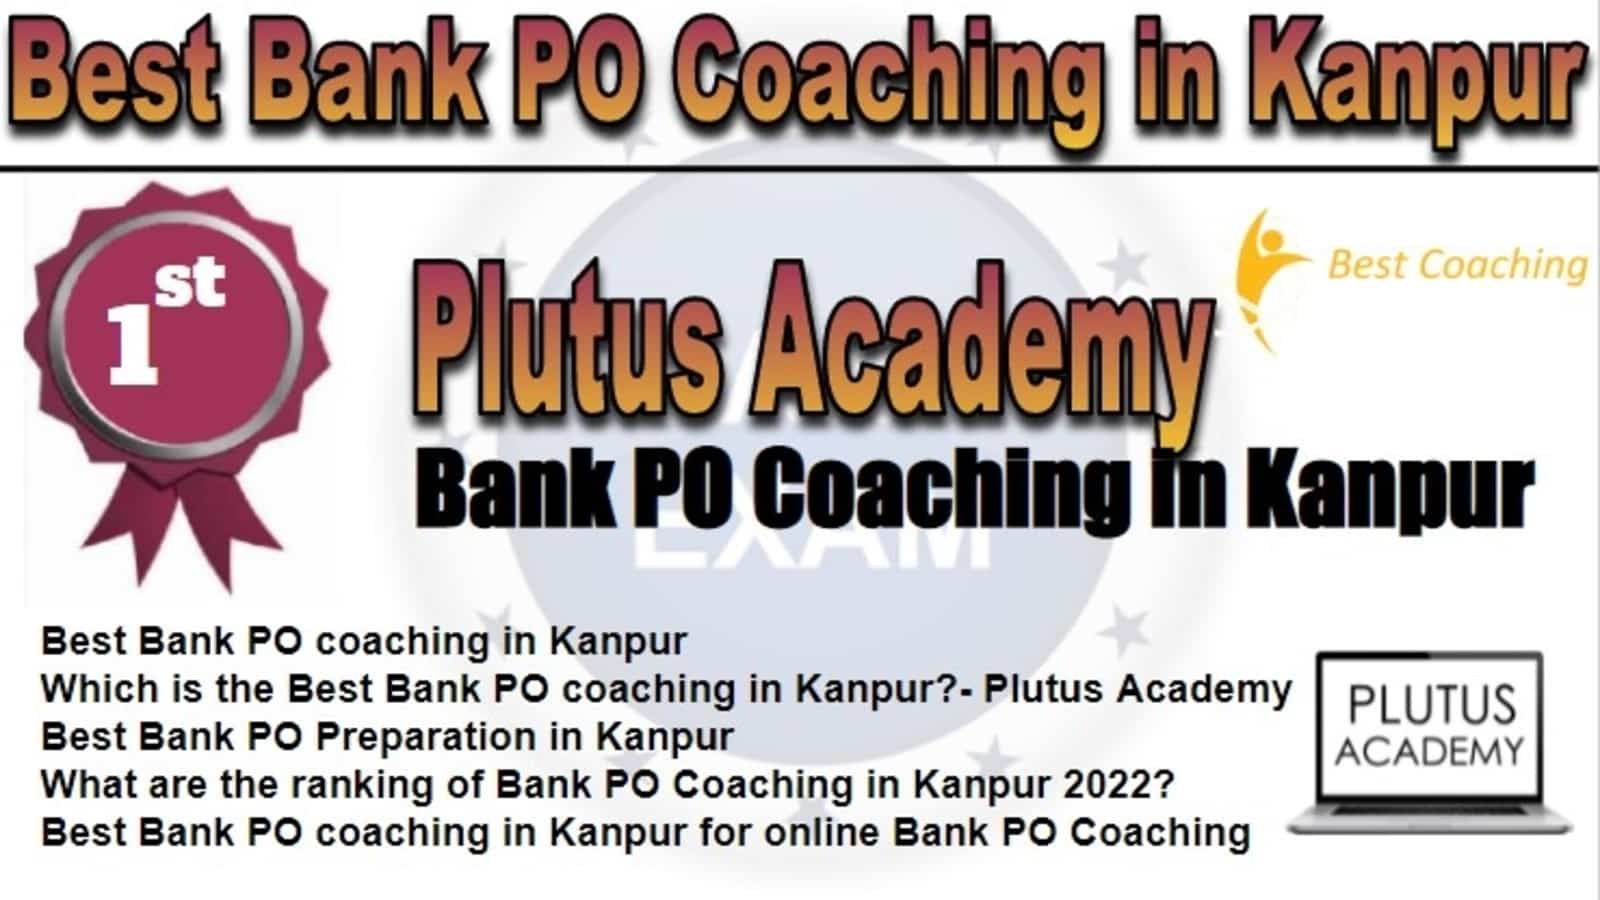 Rank 1 Best Bank PO Coaching in Kanpur